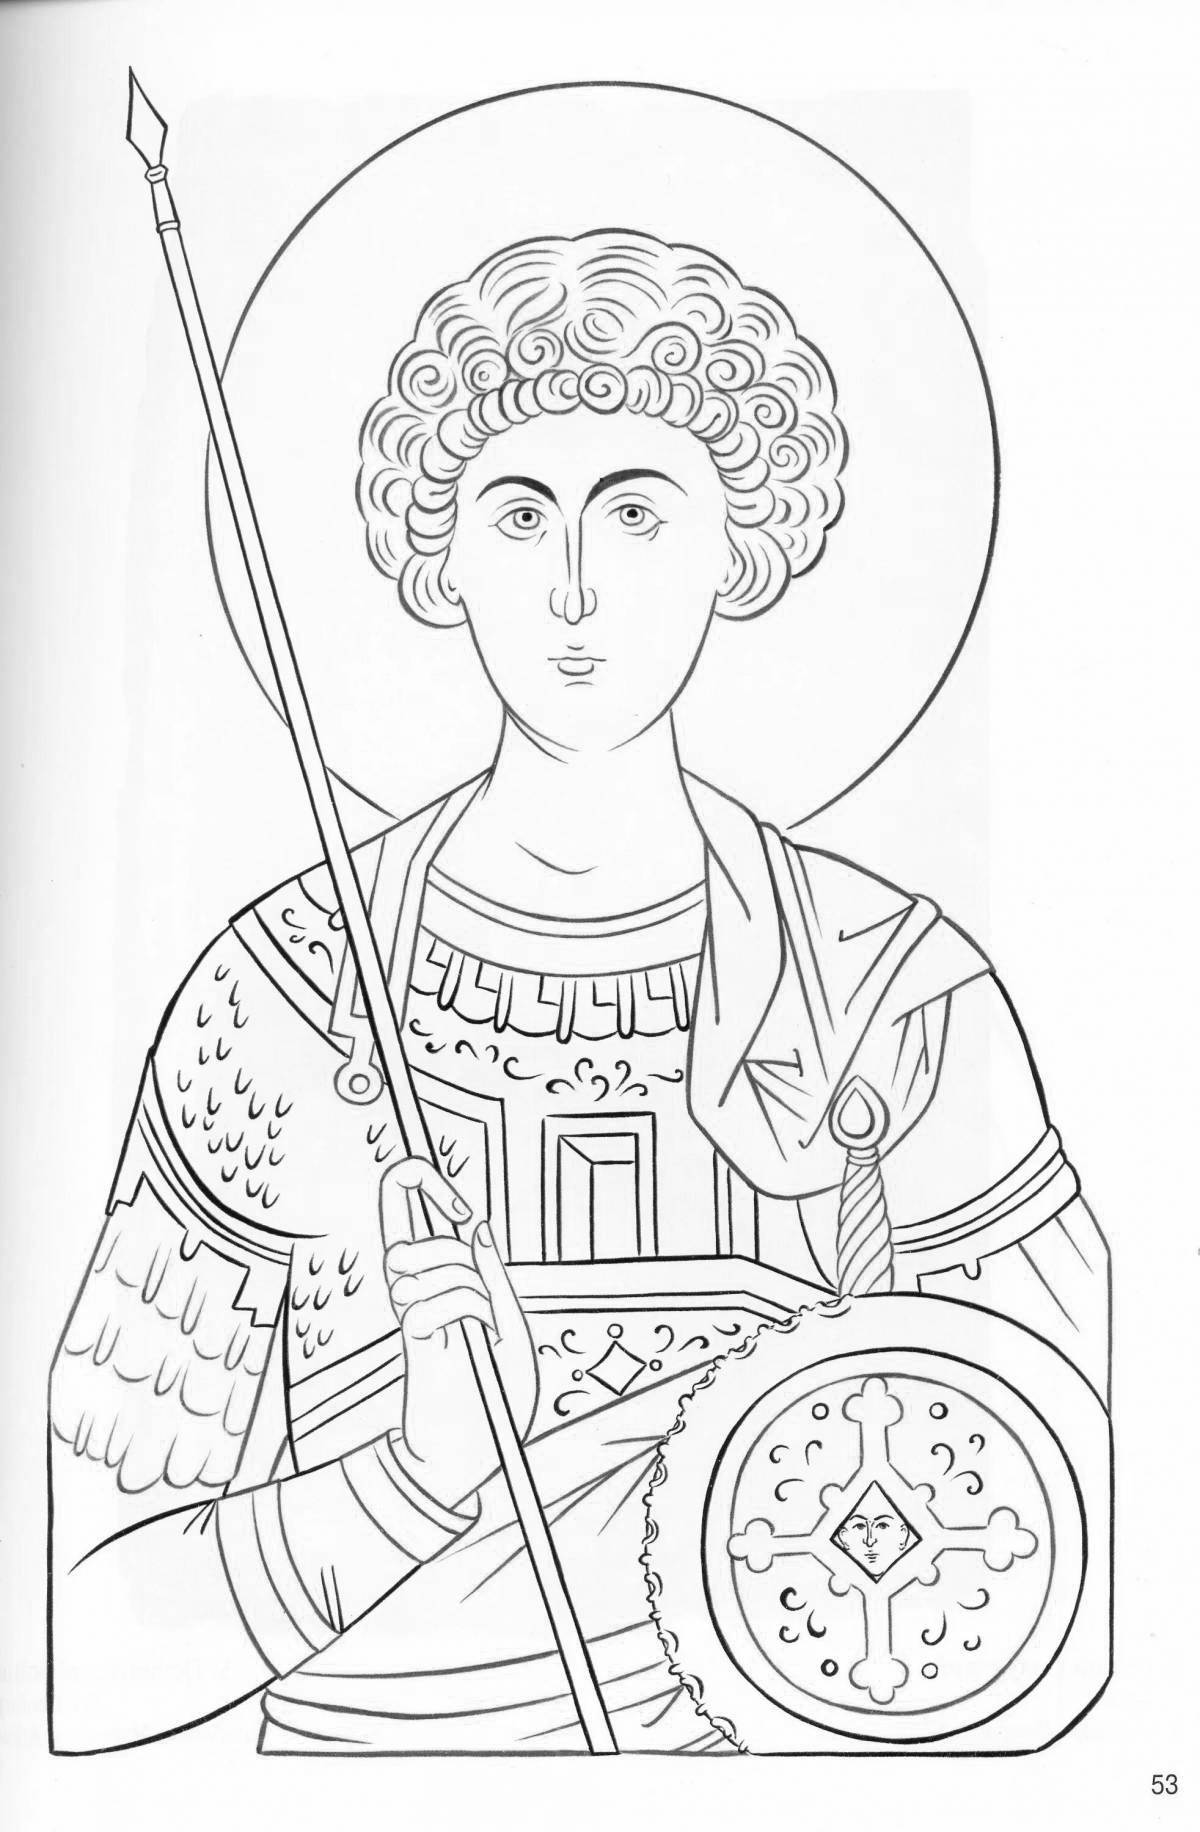 Coloring page radiant george the victorious